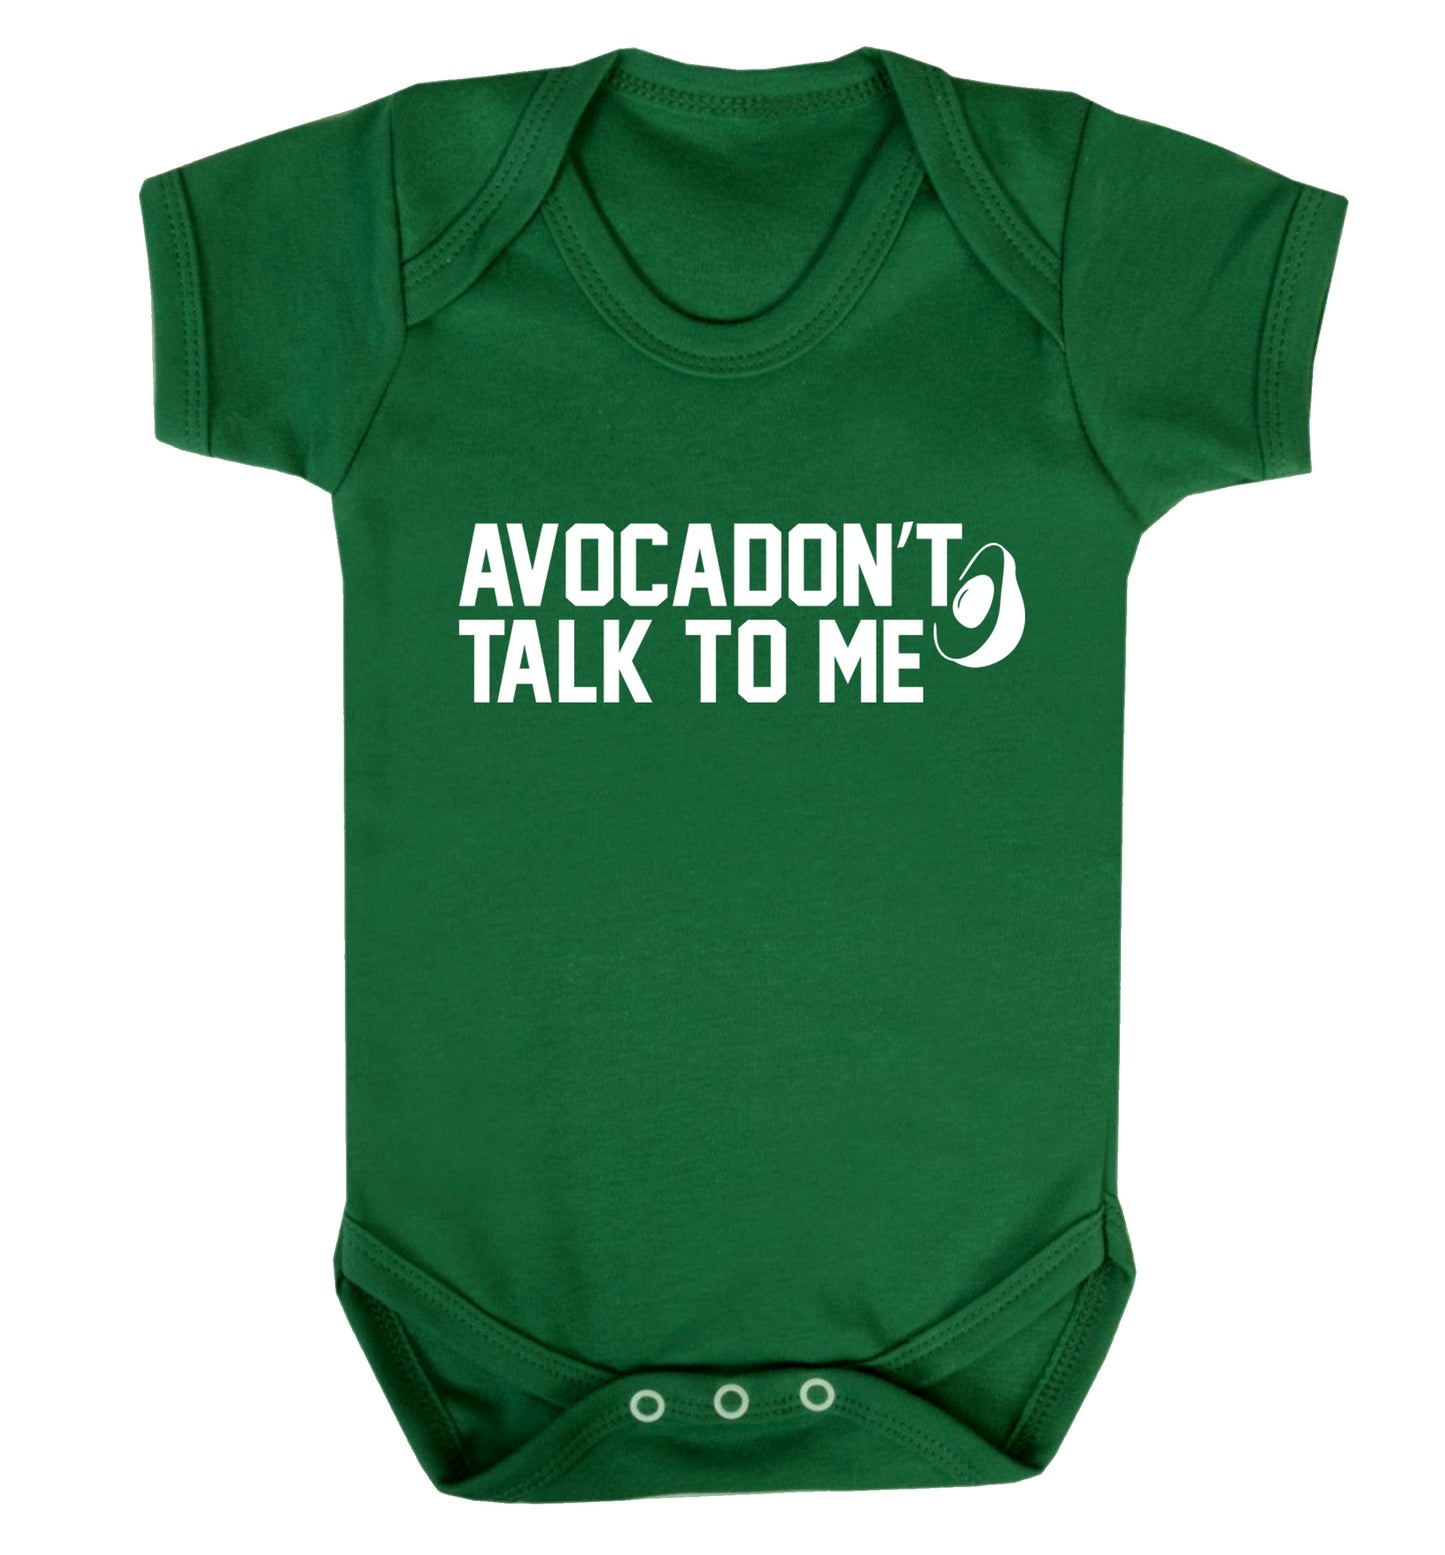 Avocadon't talk to me Baby Vest green 18-24 months